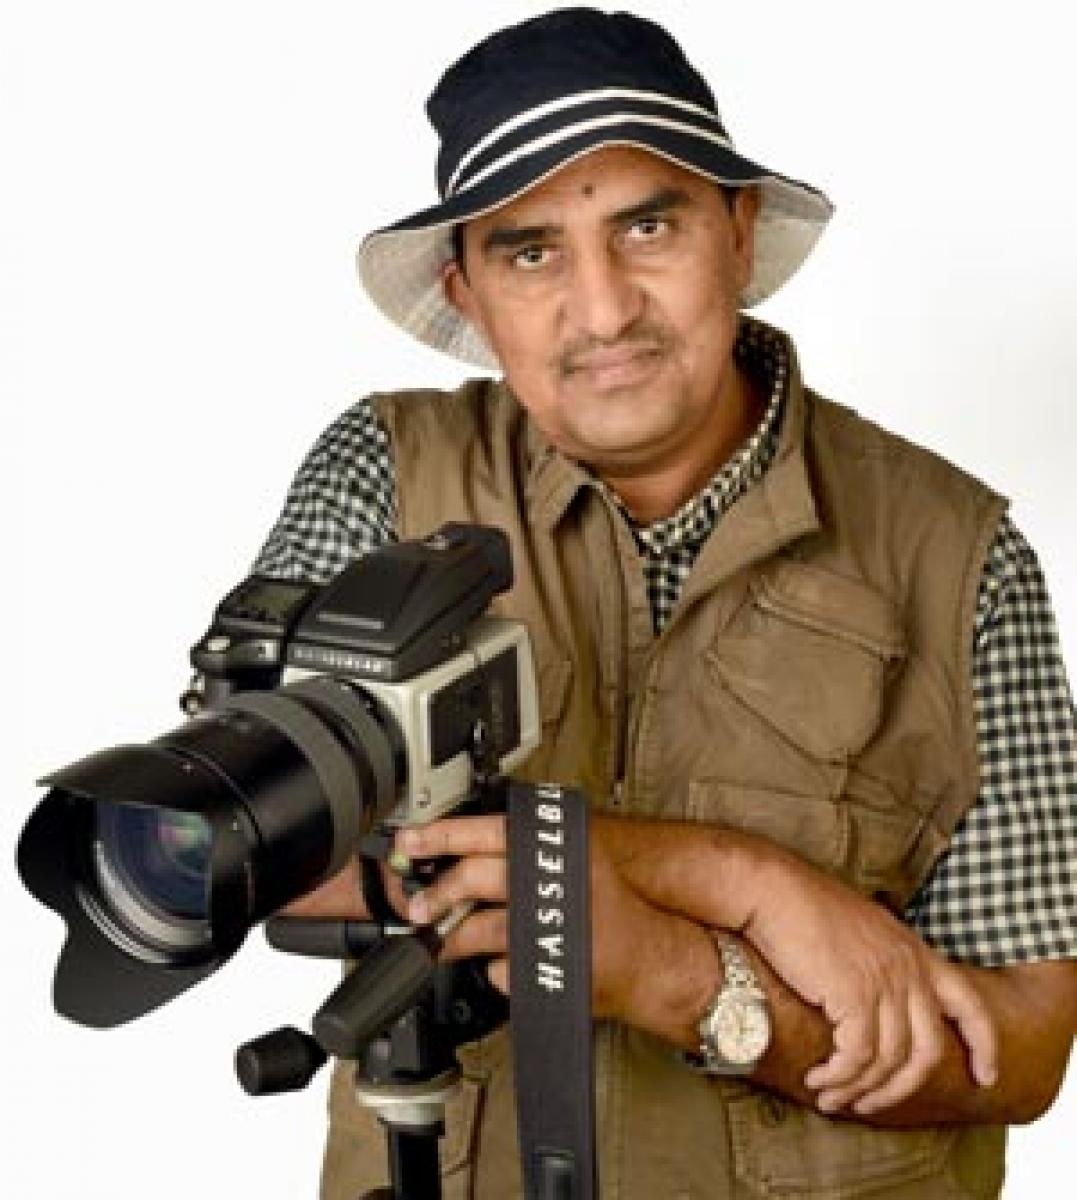 AP lens man to participate in global photo exhibition